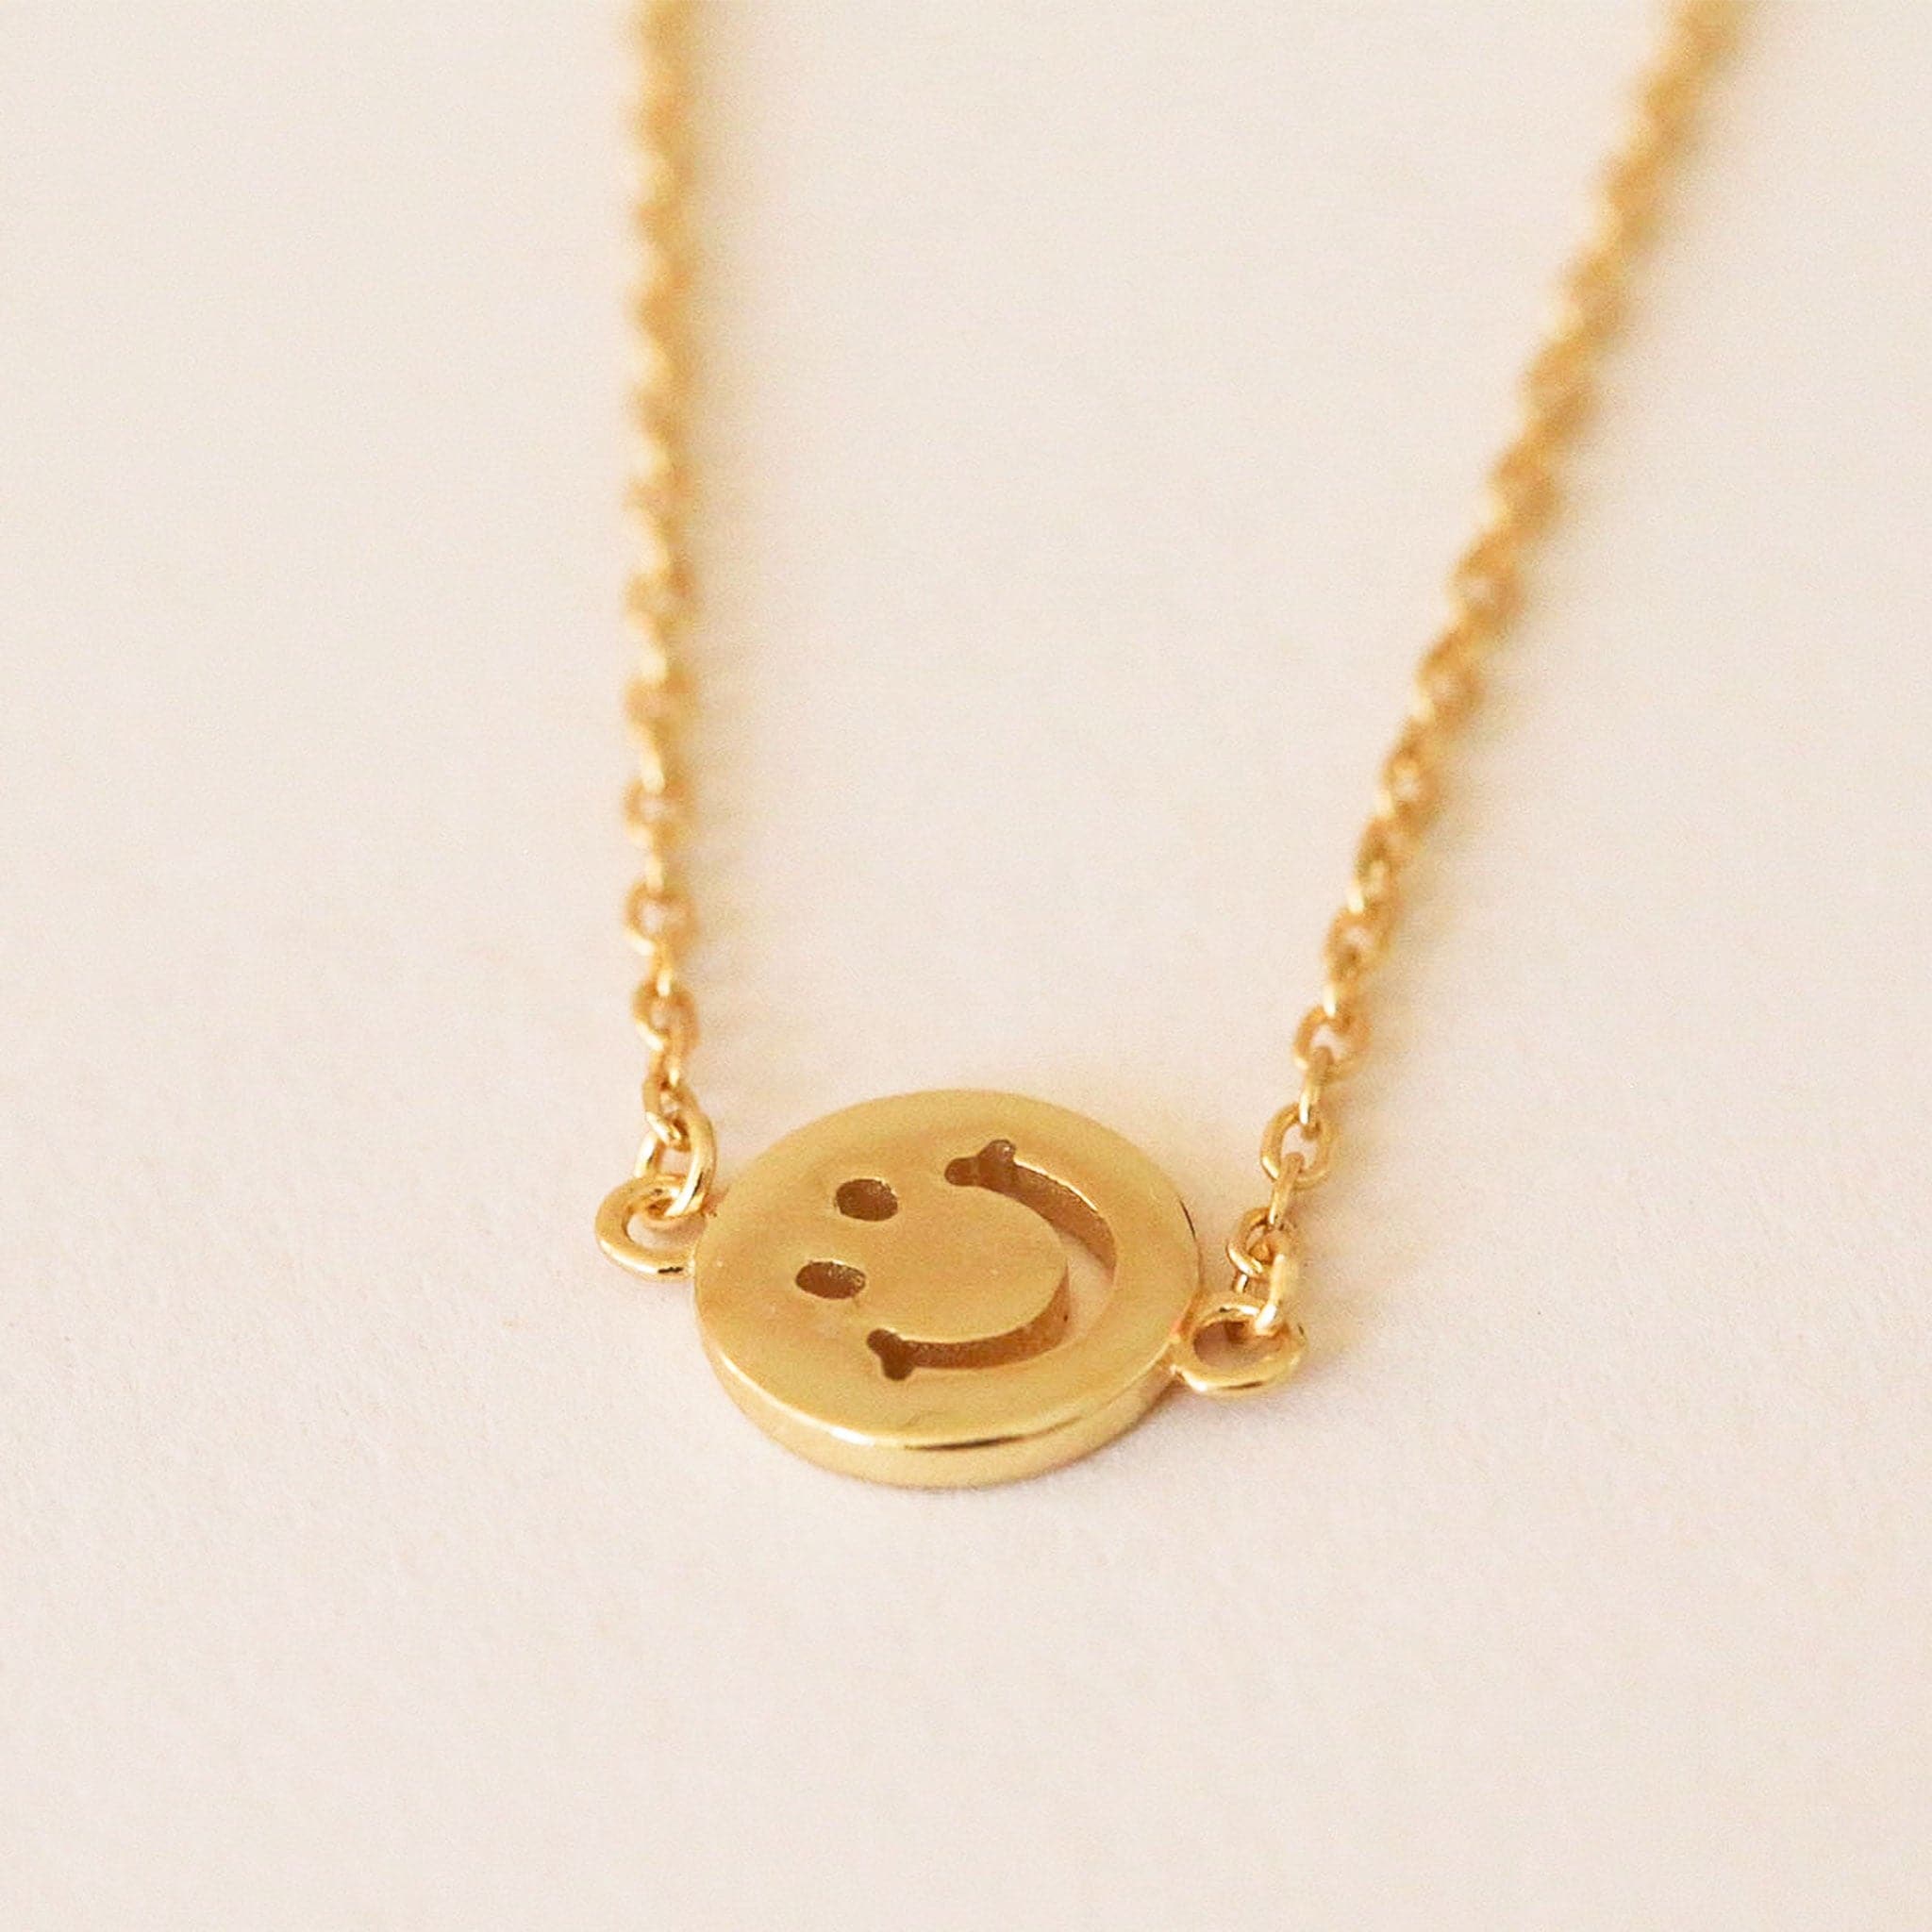 Gold chain necklace complete with classic smiley face pendant turned sideways. The pendent is connected to the chain by two loops on each side.